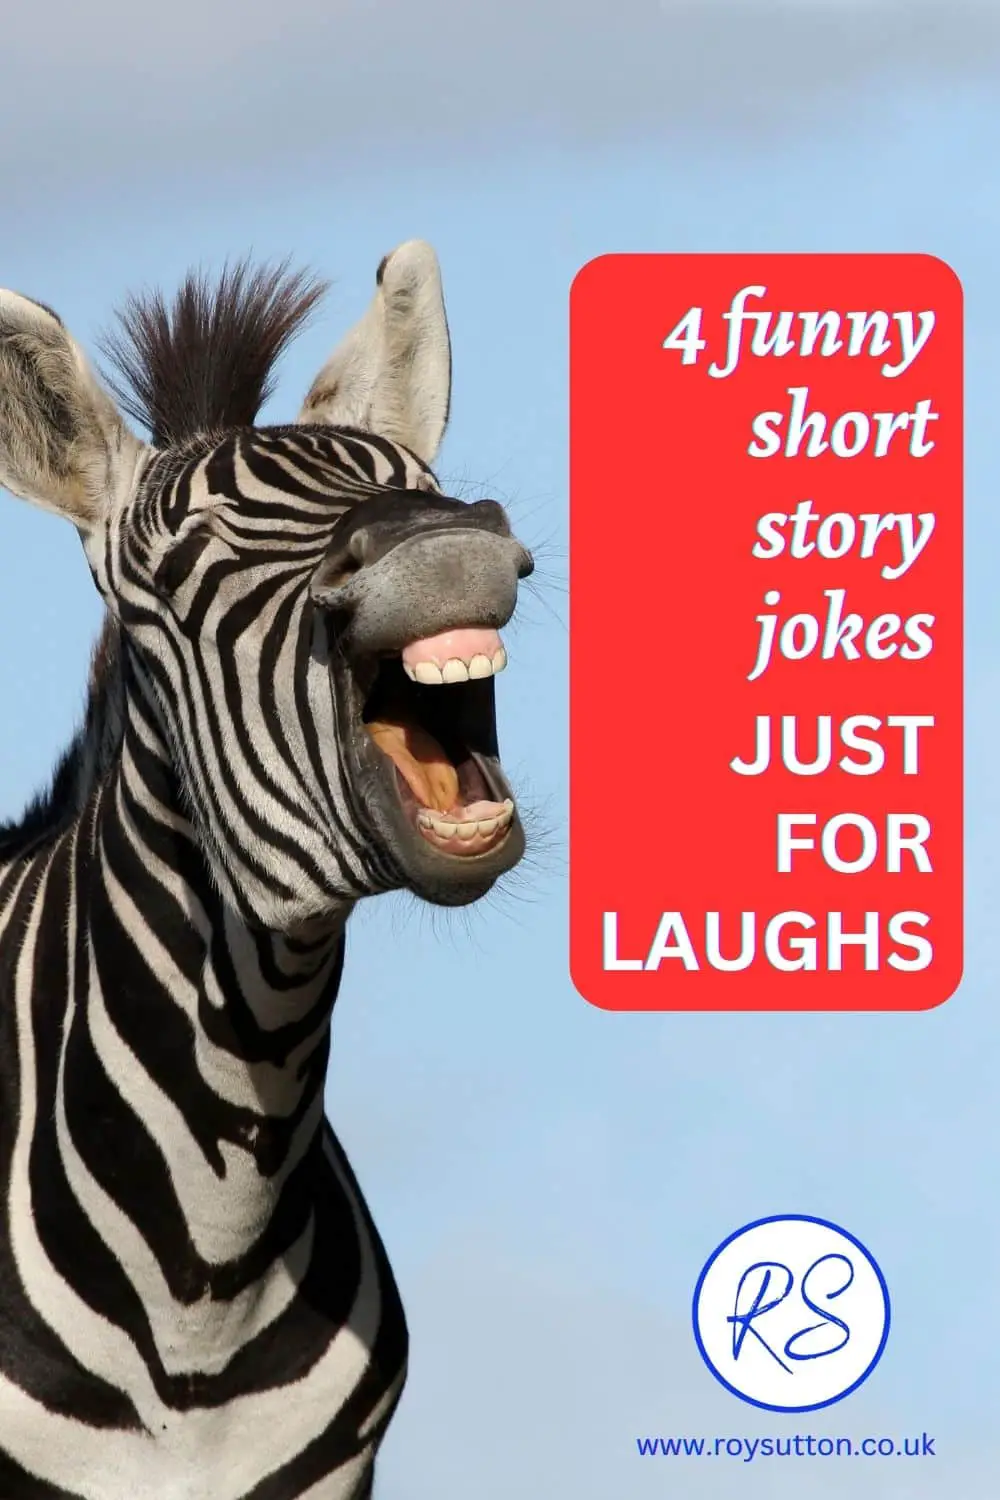 4 funny short story jokes shared just for laughs - Roy Sutton